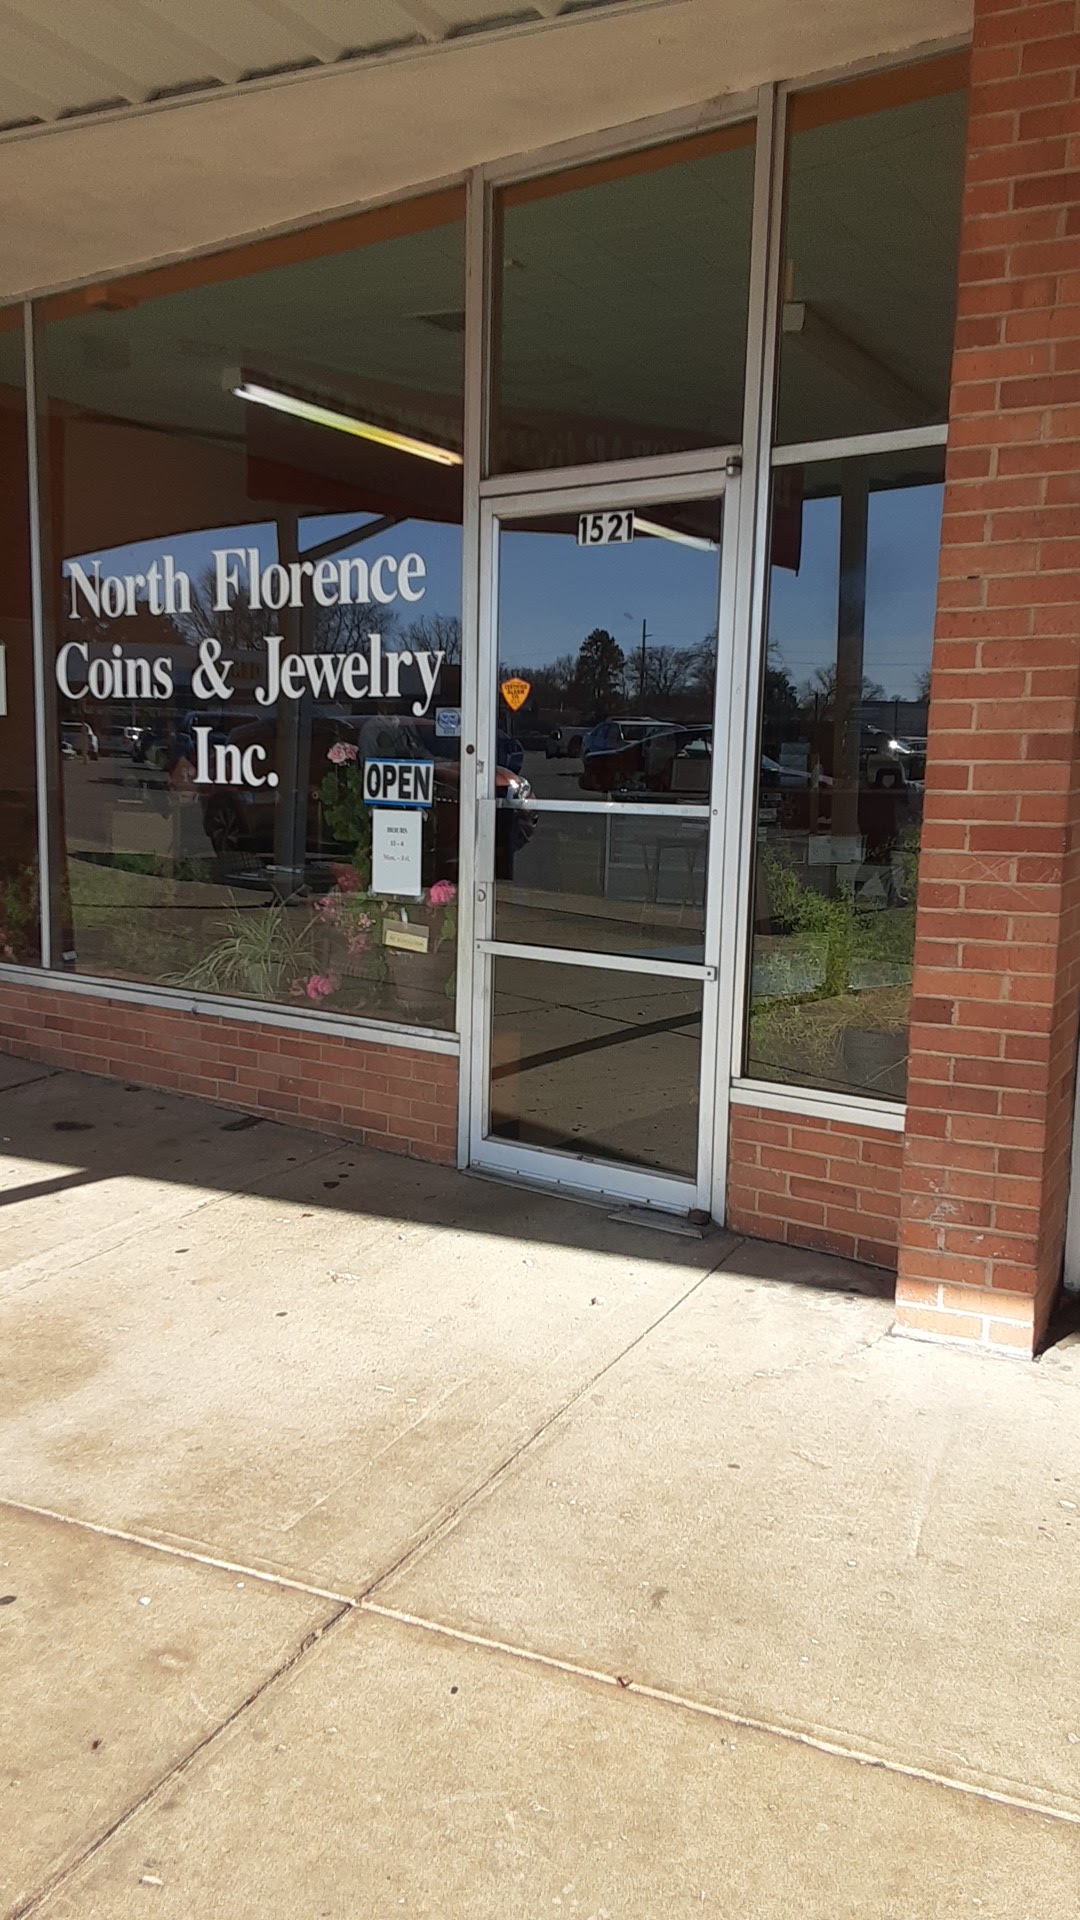 North Florence Coins & Jewelry